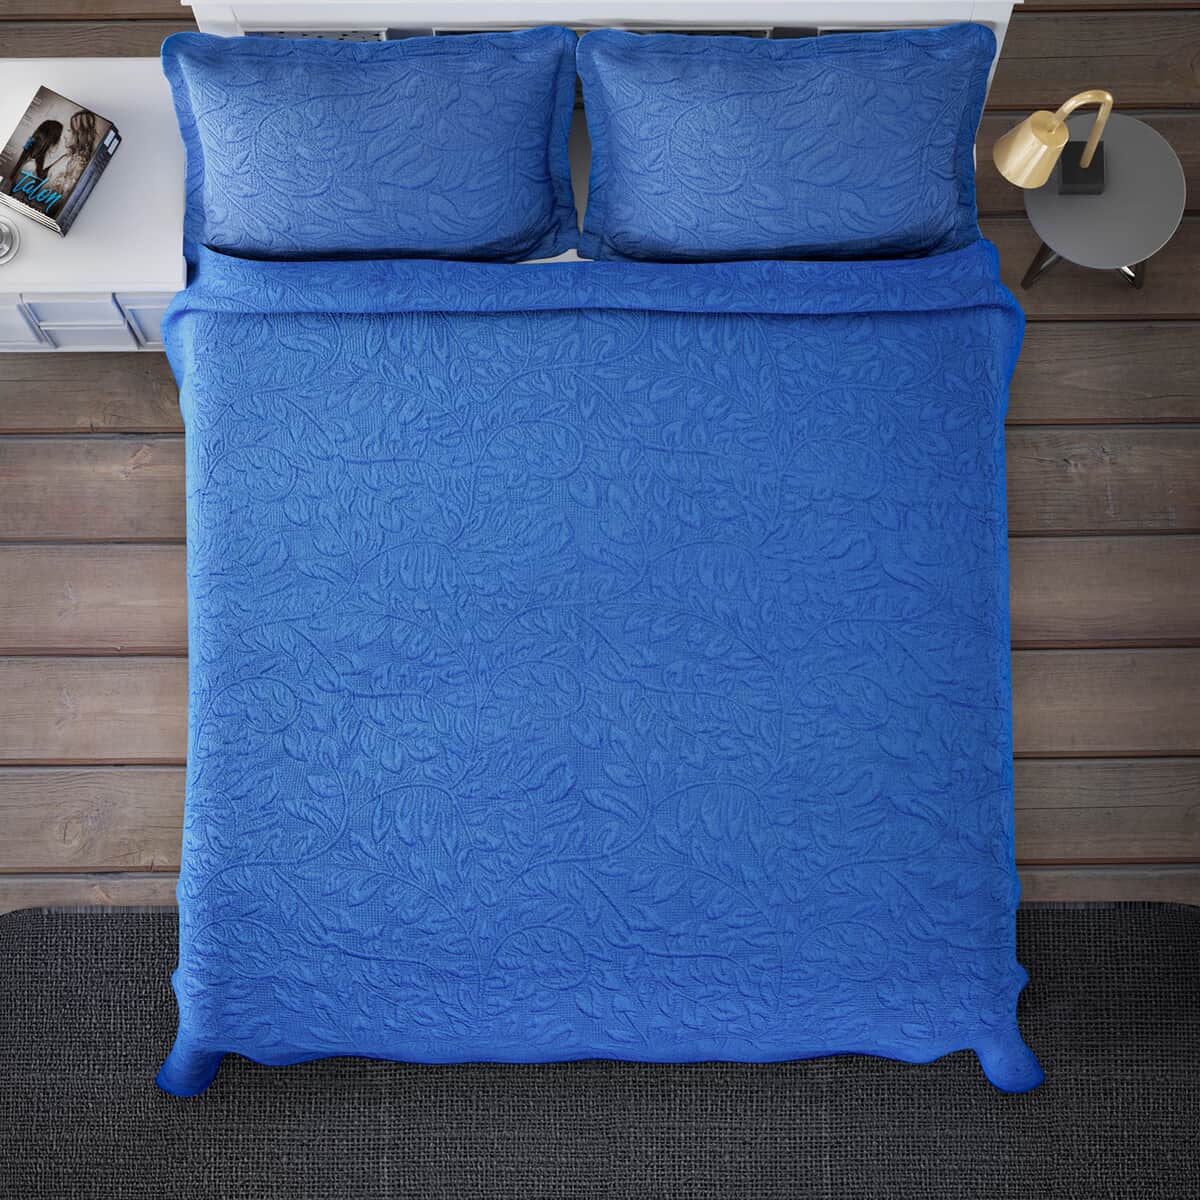 HOMESMART Blue 3D Pinsonic Embossed Pattern Quilt with 2 Shams - Queen (Microfiber) image number 2